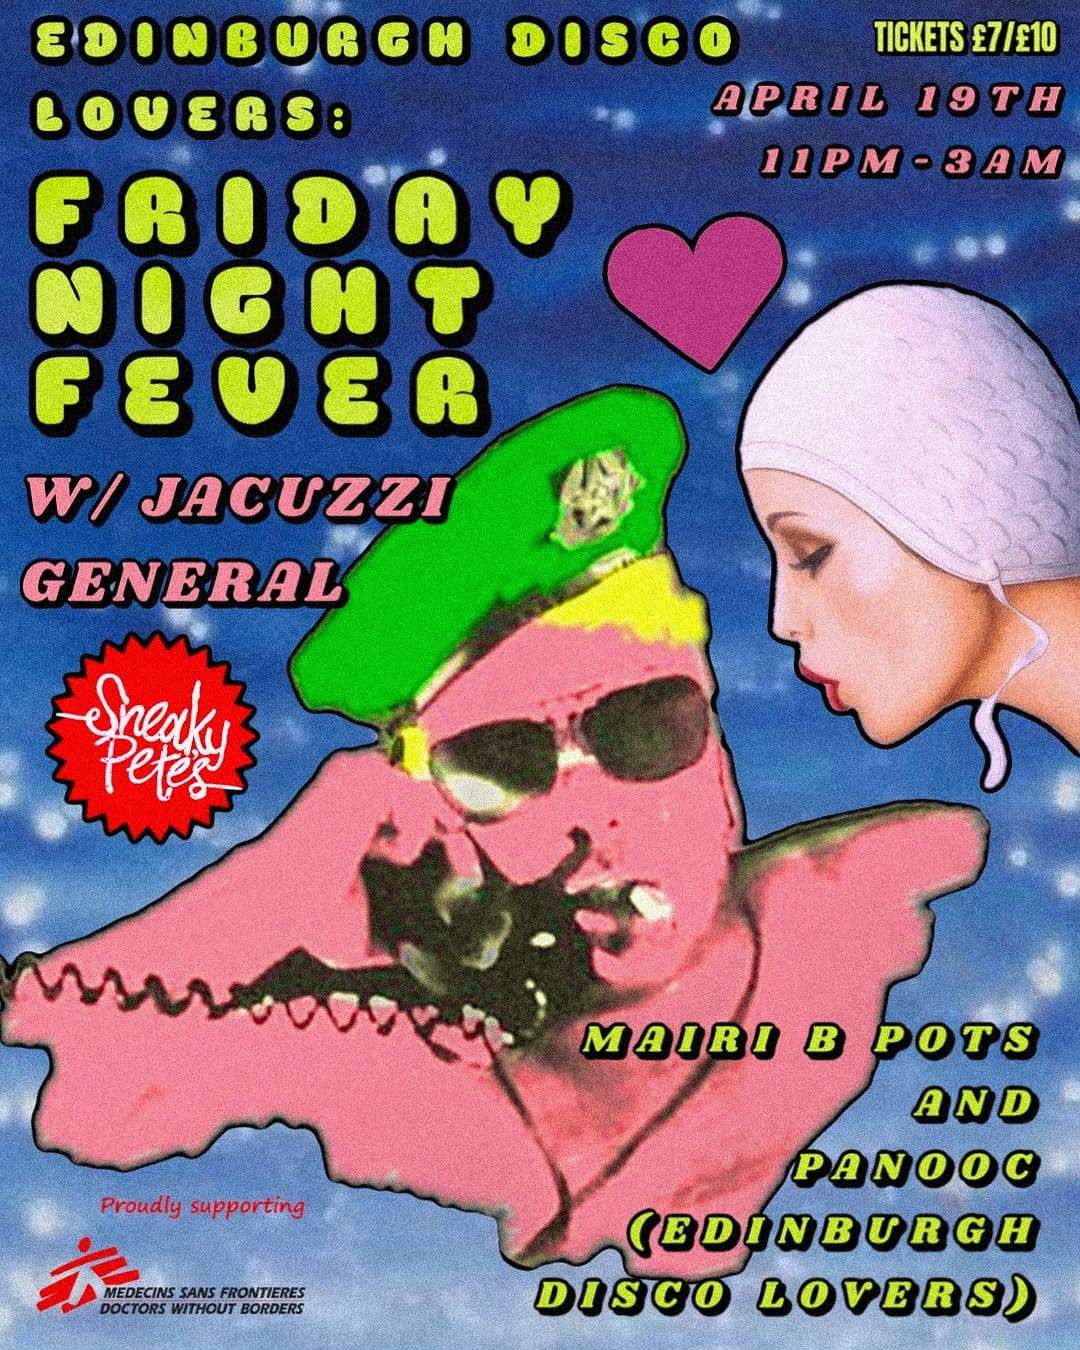 Edinburgh Disco Lovers: Friday Night Fever with Jacuzzi General - フライヤー表